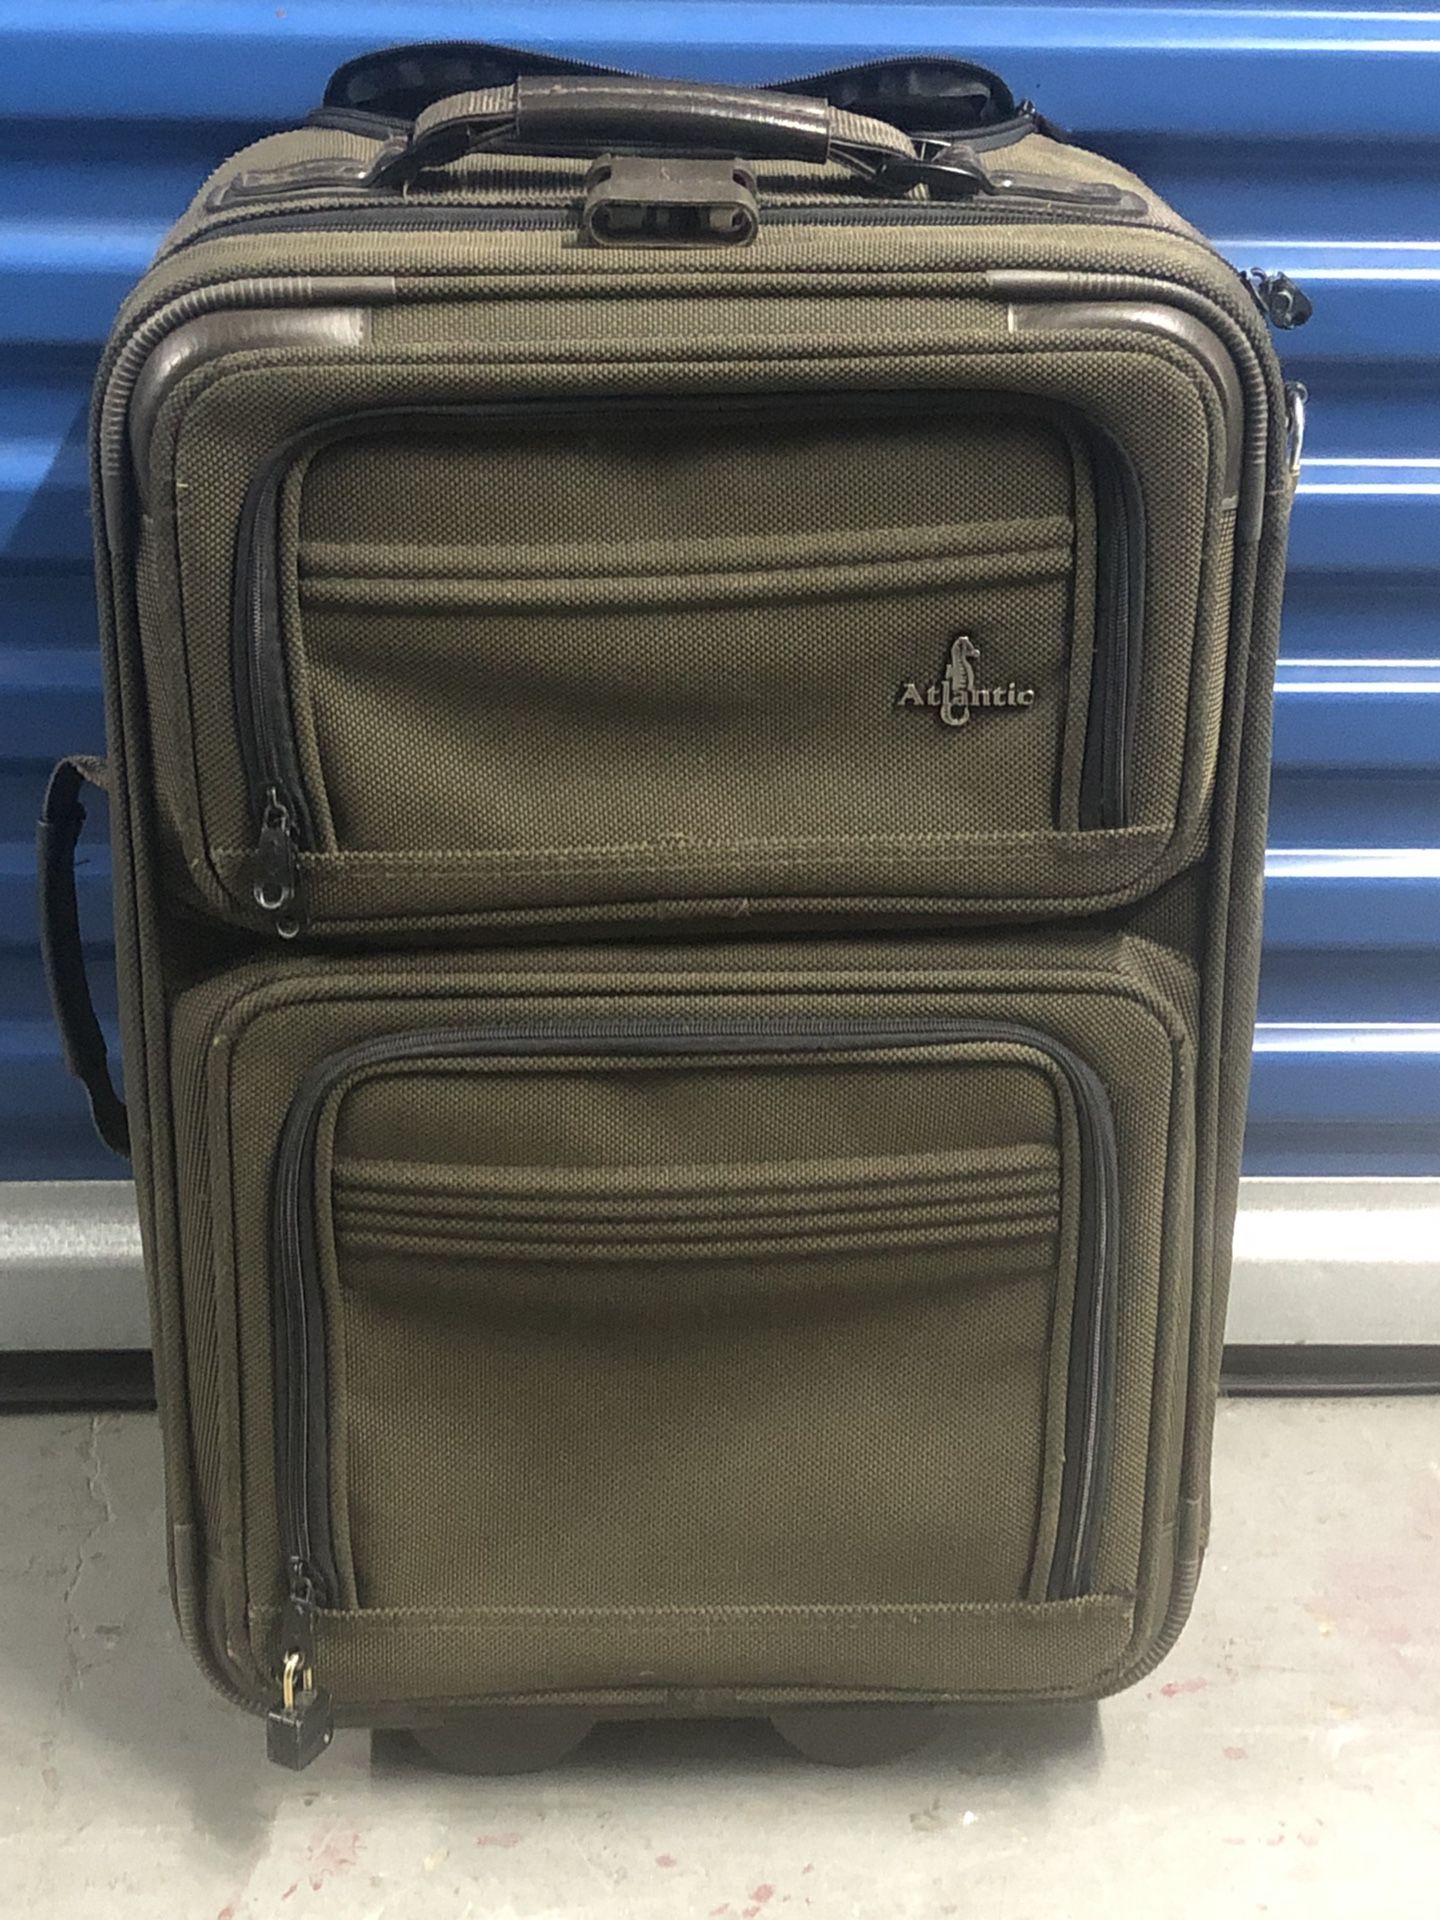 Atlantic Carry On Luggage 